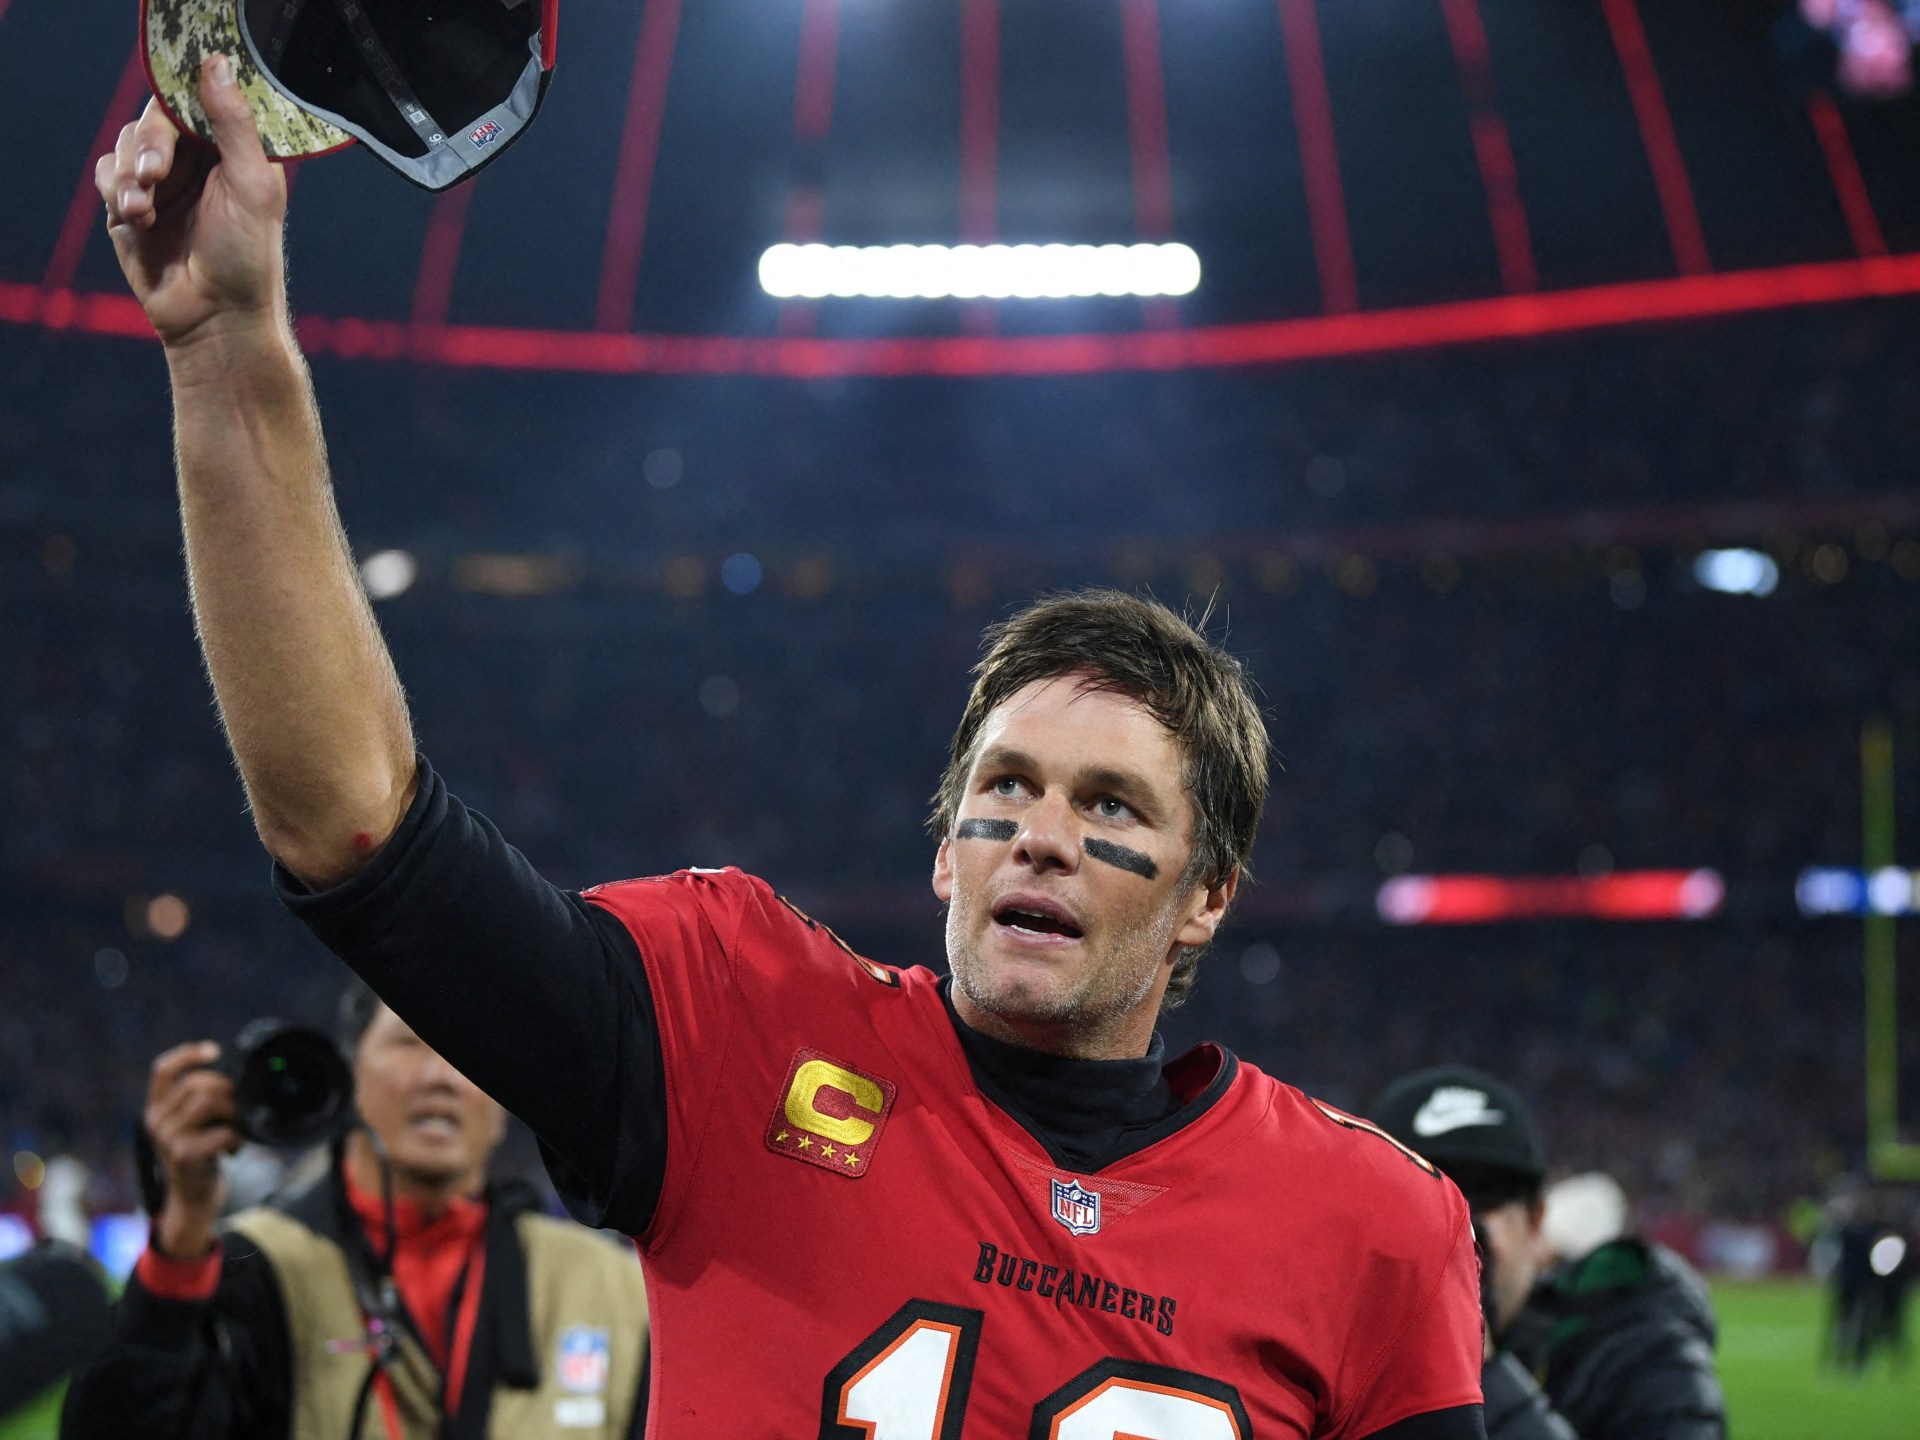 NFL's GOAT Tom Brady retires again, this time 'for good